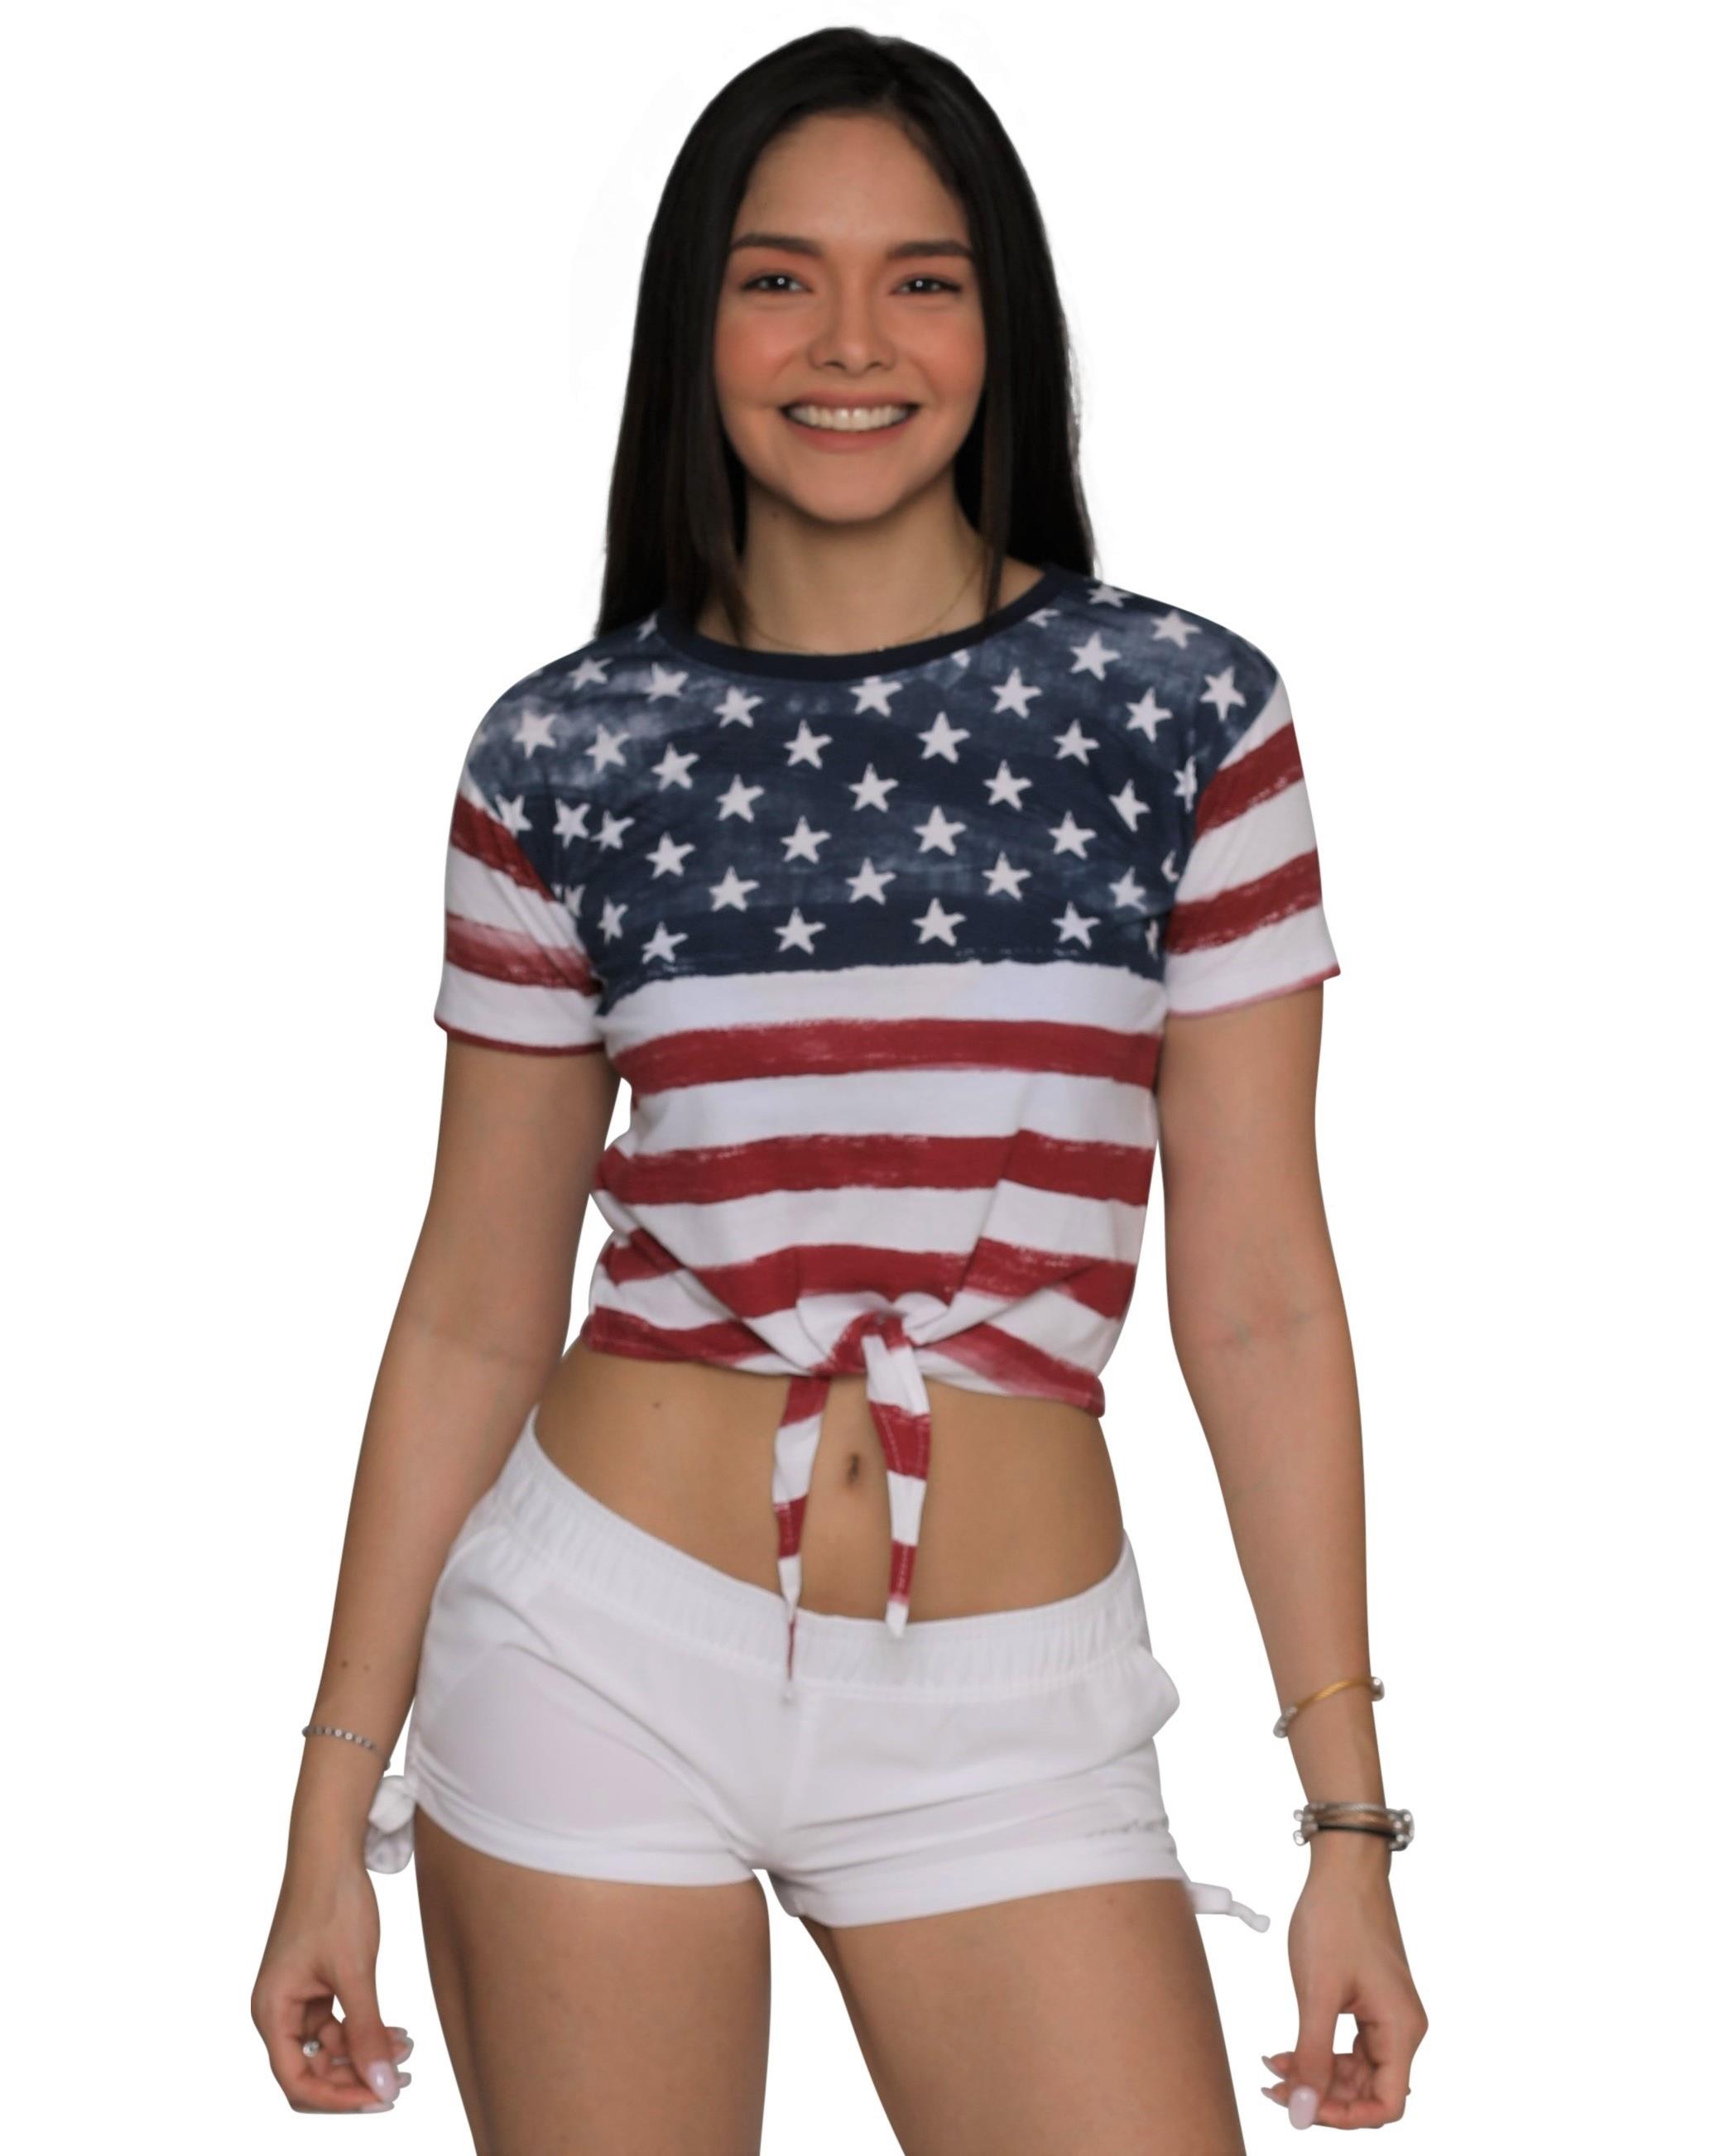 U.S. Vintage Knot Front Cuffed Sleeve / Sleeveless Stars and Stripes Crop Top Tee USA Patriotic T-Shirt, Stars, Size: Large - image 4 of 4